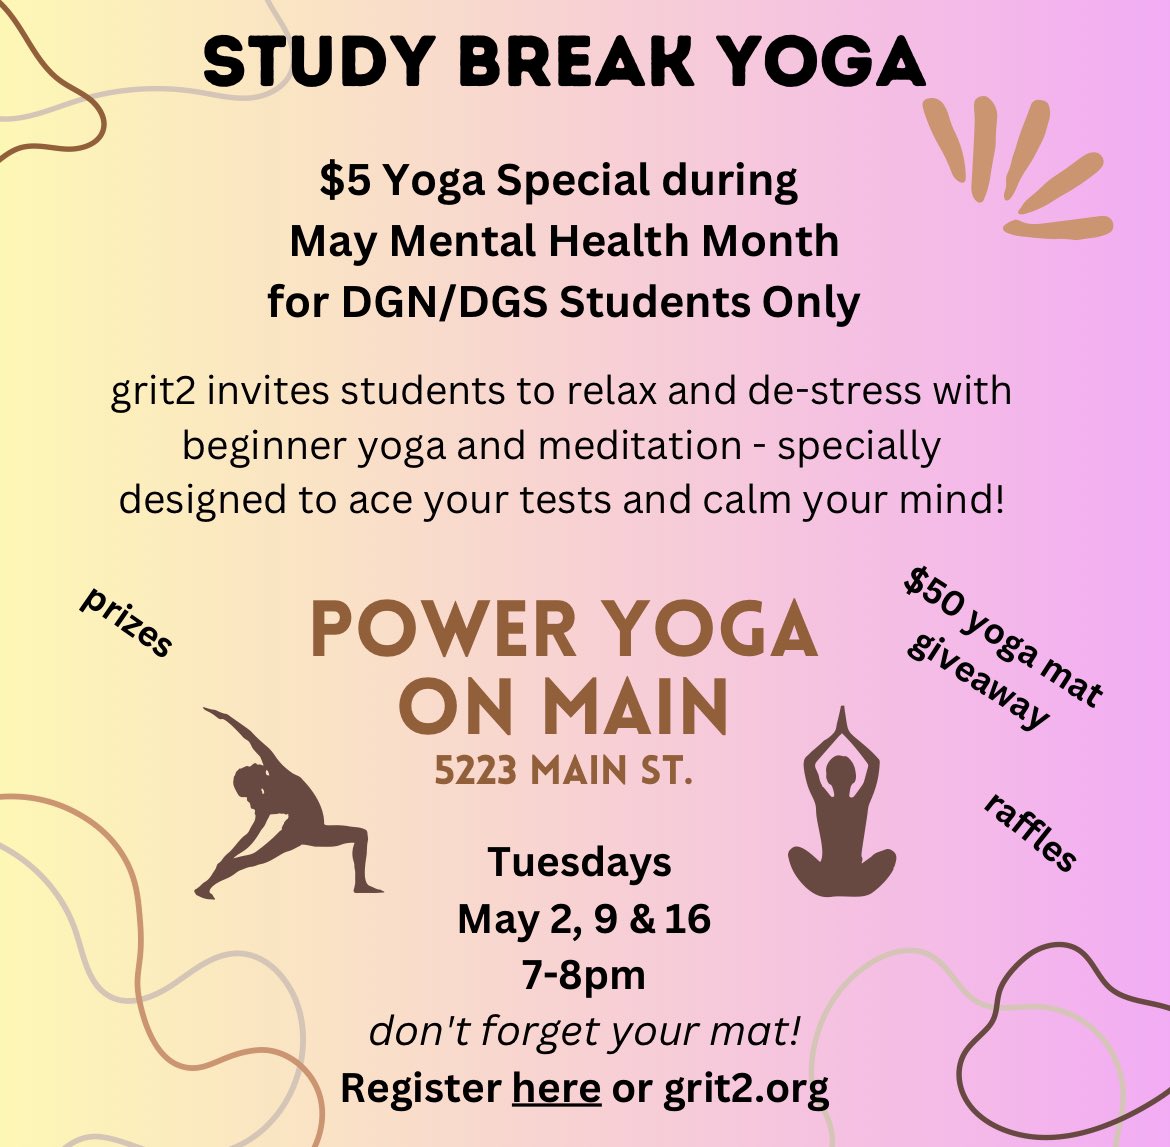 D99 students are invited to PYOM to practice yoga and mindfulness in May. Find your inner zen.  #maymentalhealth grit2.org